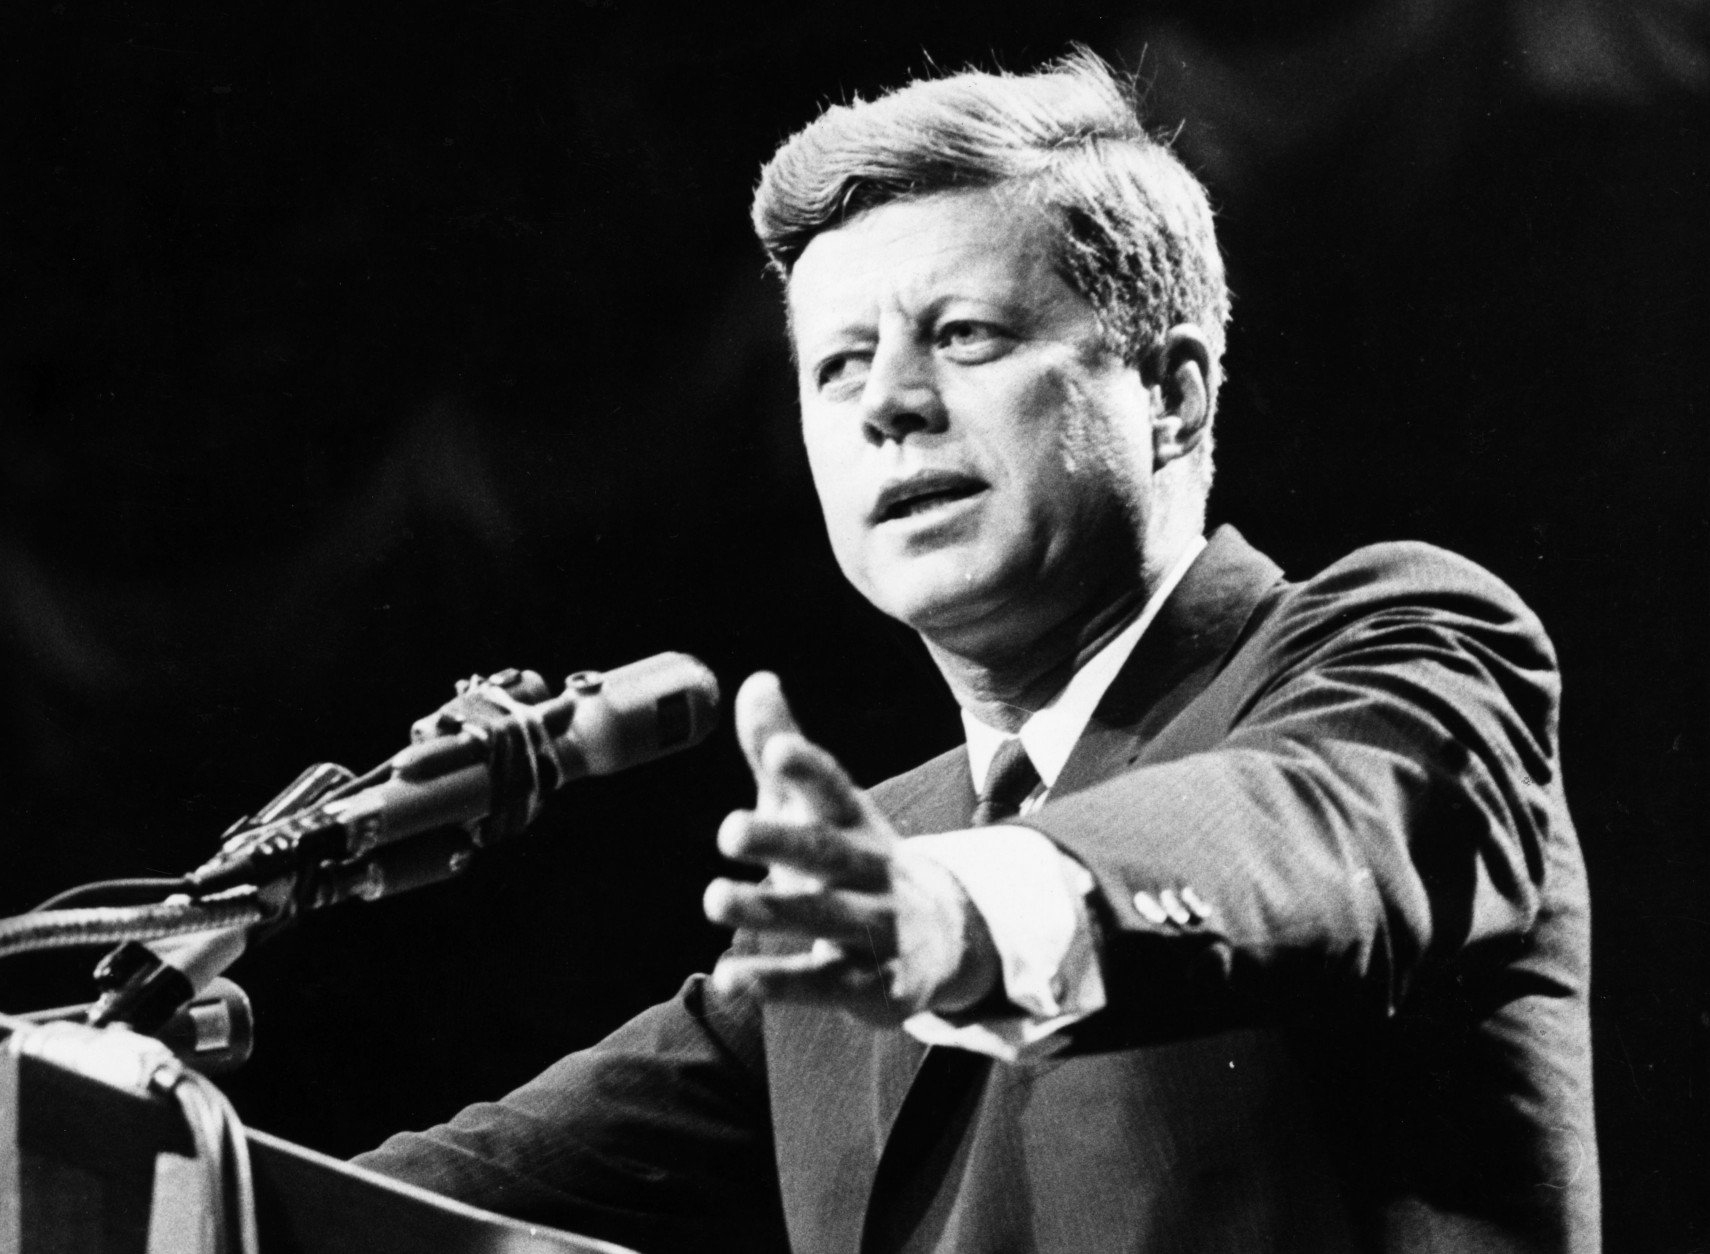 1962:  US statesman John F Kennedy, 35th president of the USA, making a speech.  (Photo by Central Press/Getty Images)